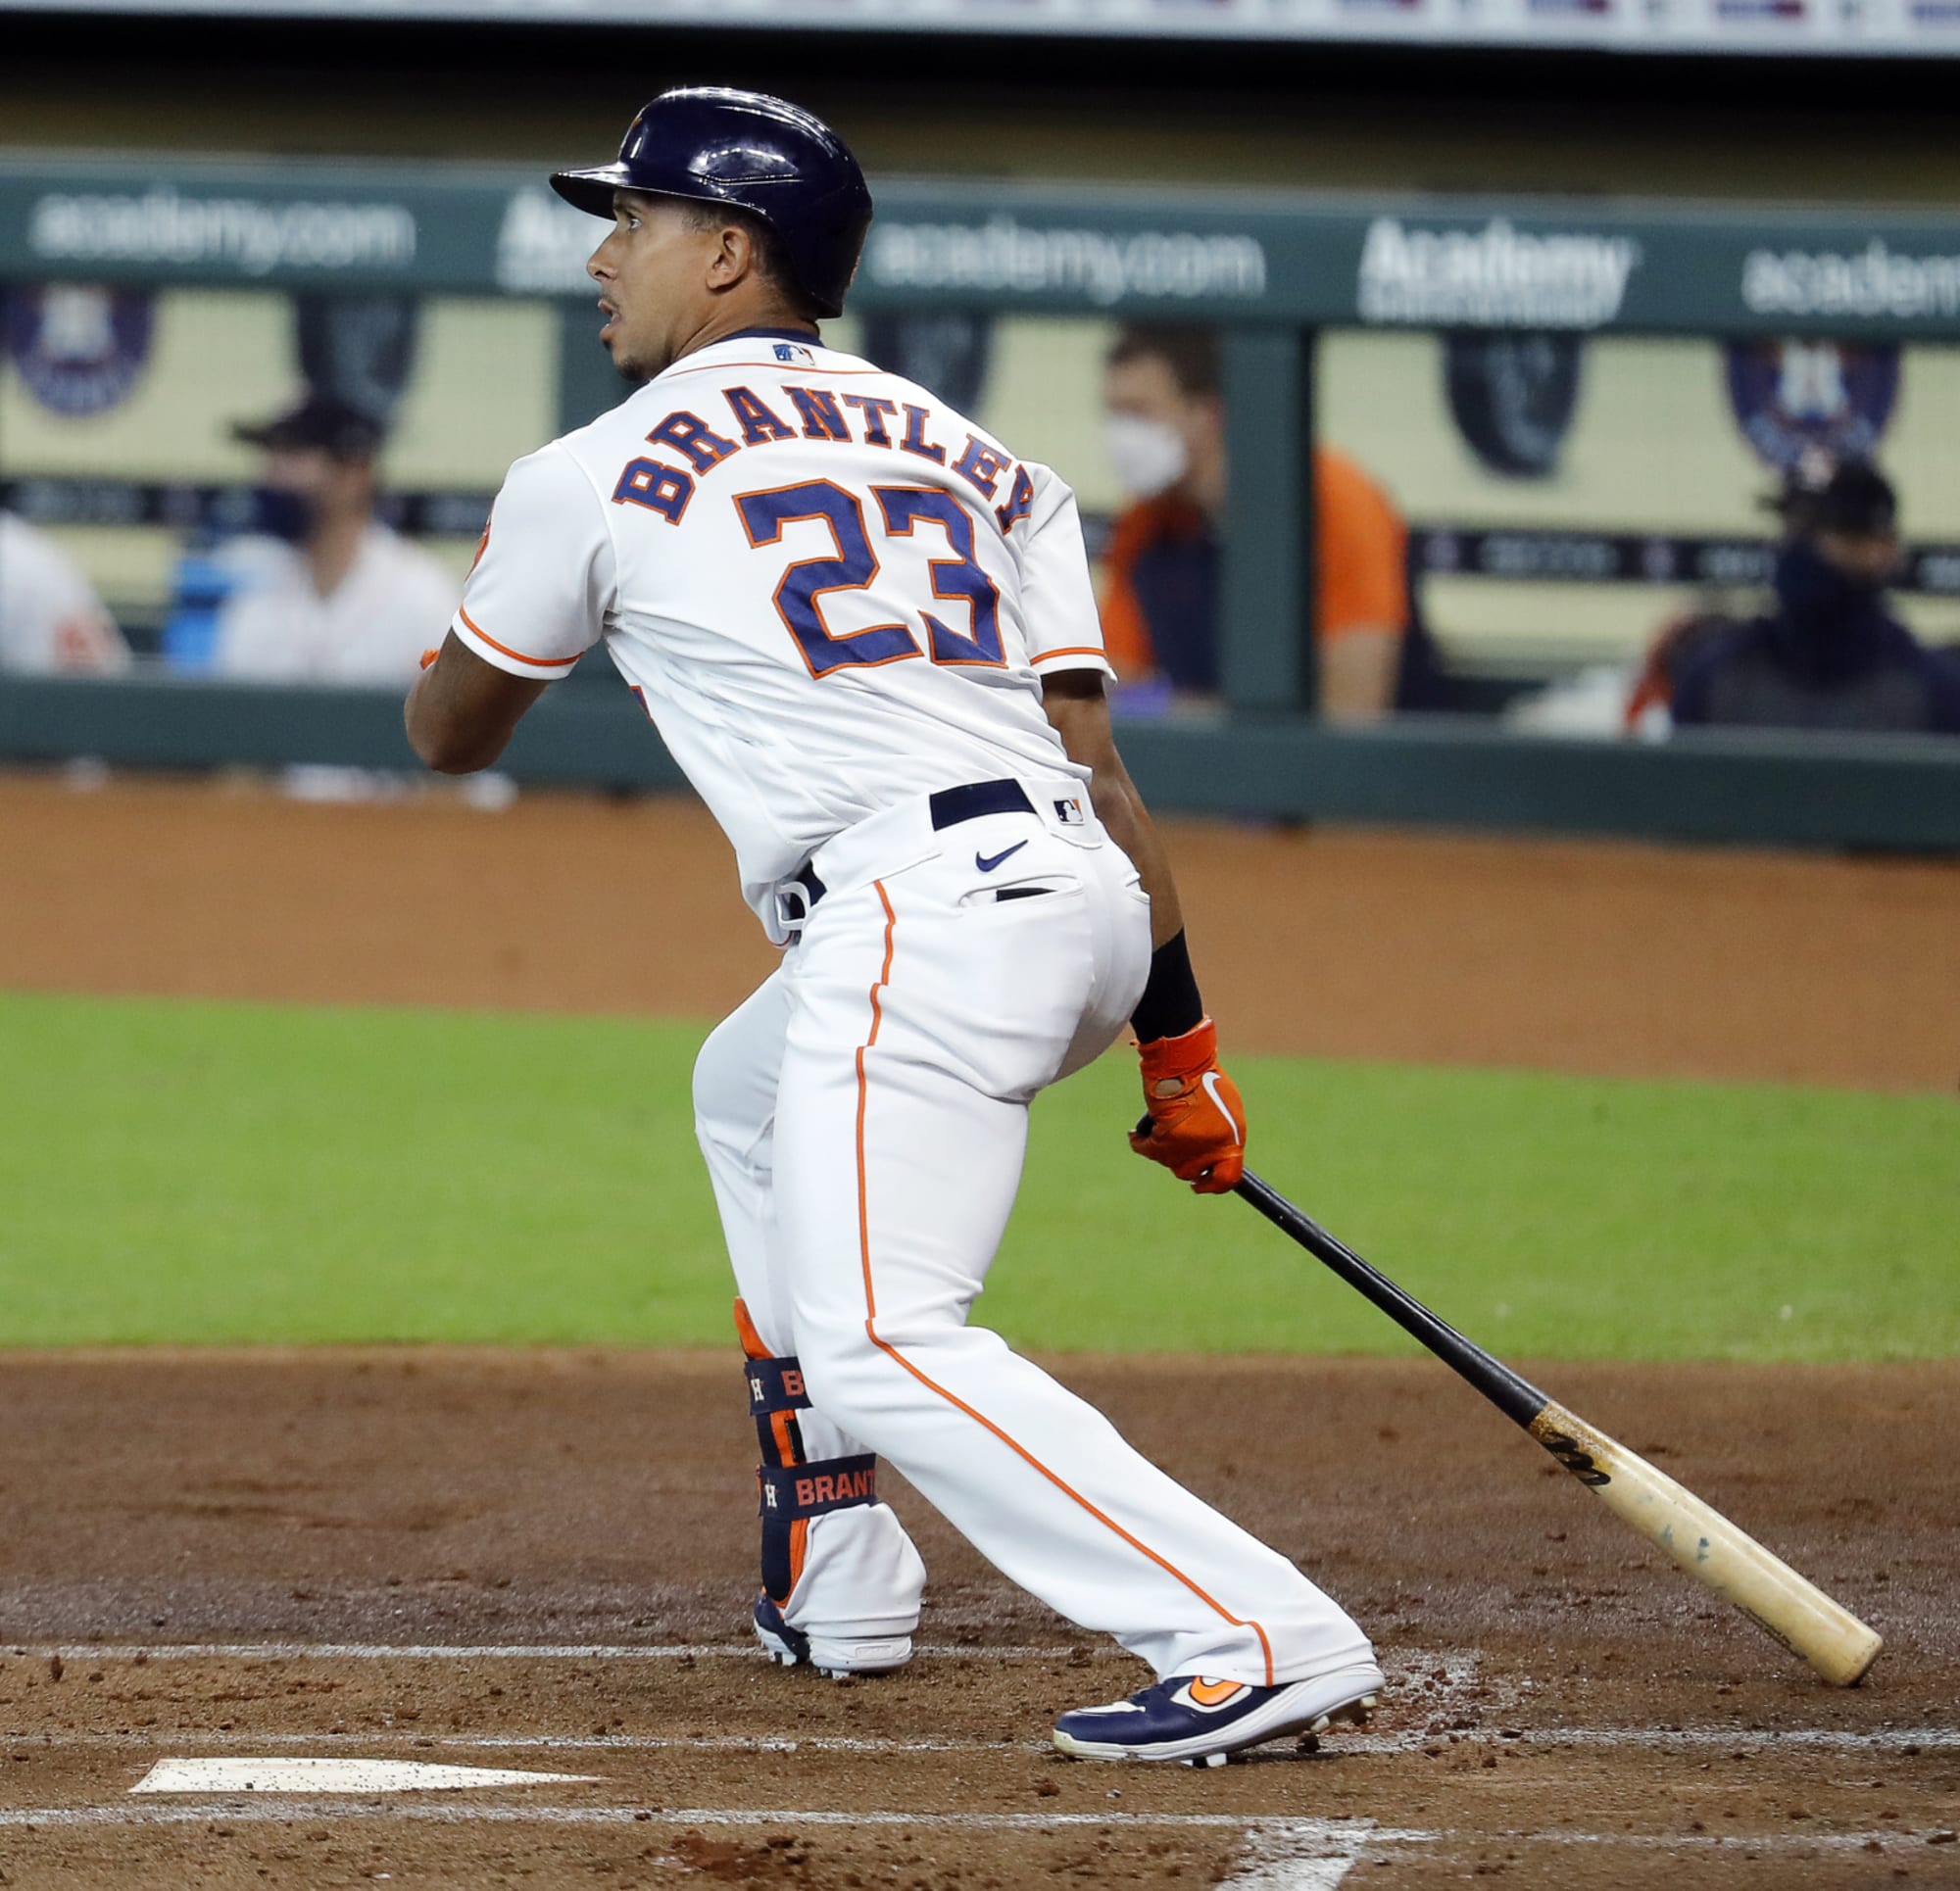 Michael Brantley: Free agent outfielder re-signs with Houston Astros